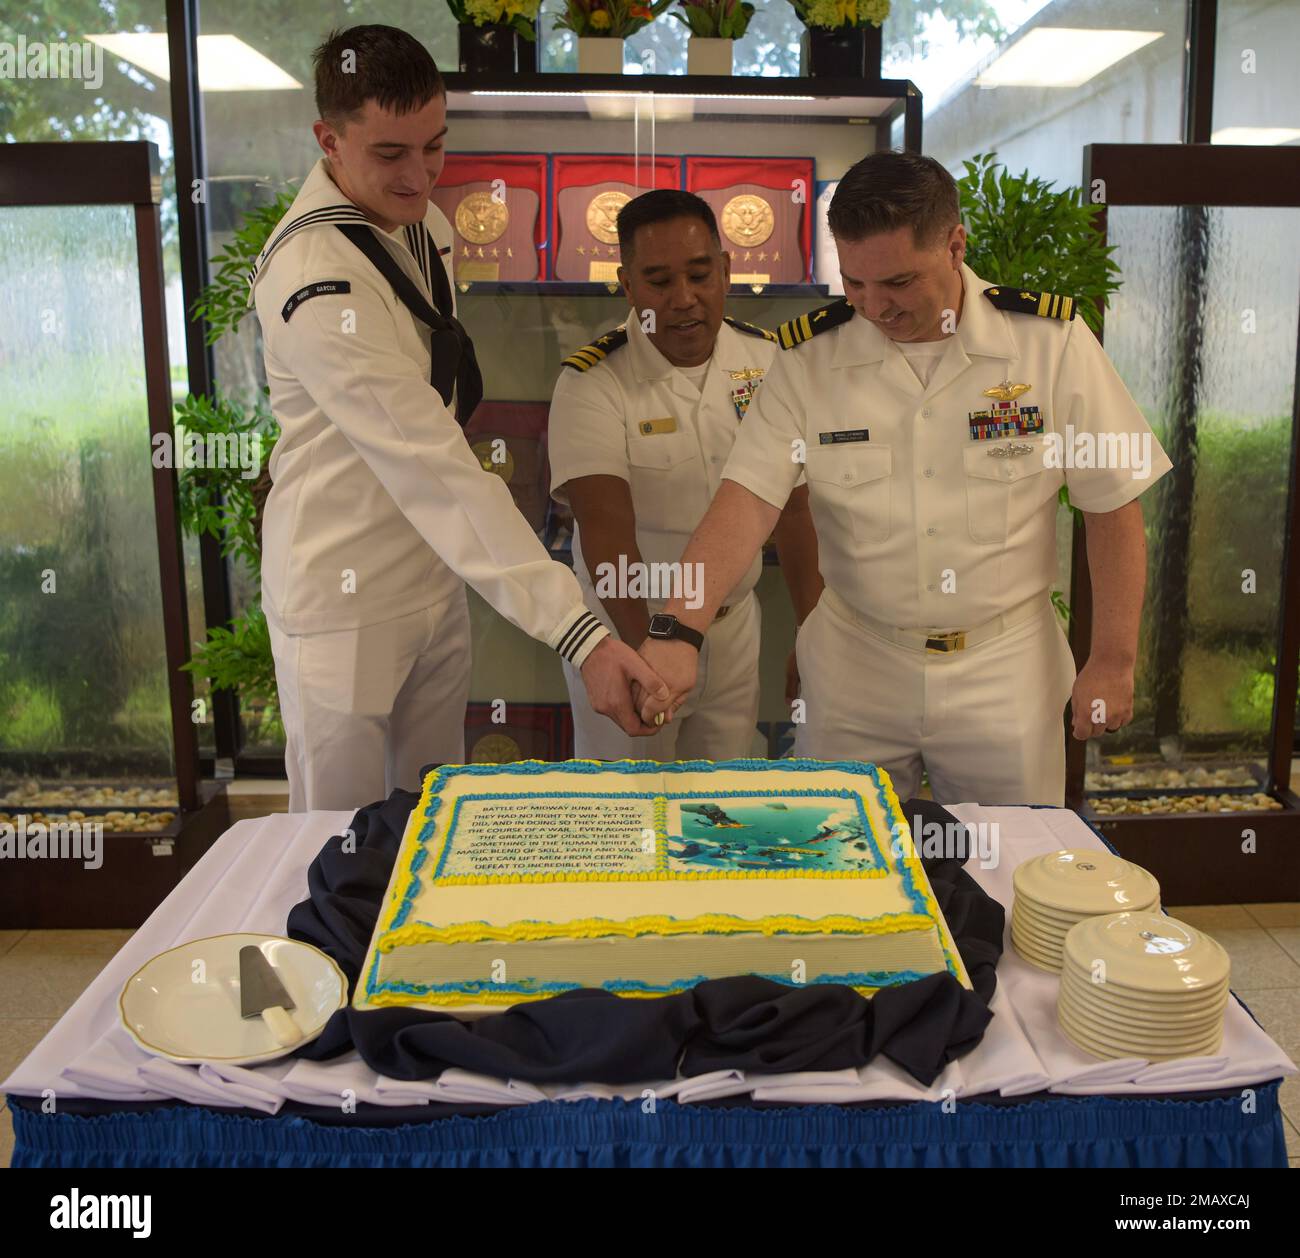 220607-N-EJ241-1021    DIEGO GARCIA, British Indian Ocean Territory (June 7, 2022) – Brady A. Stuart, assigned to U.S. Navy Support Facility (NSF) Diego Garcia, left, Cmdr. Robert E. Bulatao, executive officer of NSF Diego Garcia, center, and NSF Diego Garcia Command Chaplain, Lt. Cmdr. Michael J. Monroig, cut a cake during an 80th anniversary commemoration of the Battle of Midway. Our remembrance of Midway illustrates how our battle achievements in innovation, intelligence, and courage serve as a model and as inspiration as we face the challenges of the future. Stock Photo